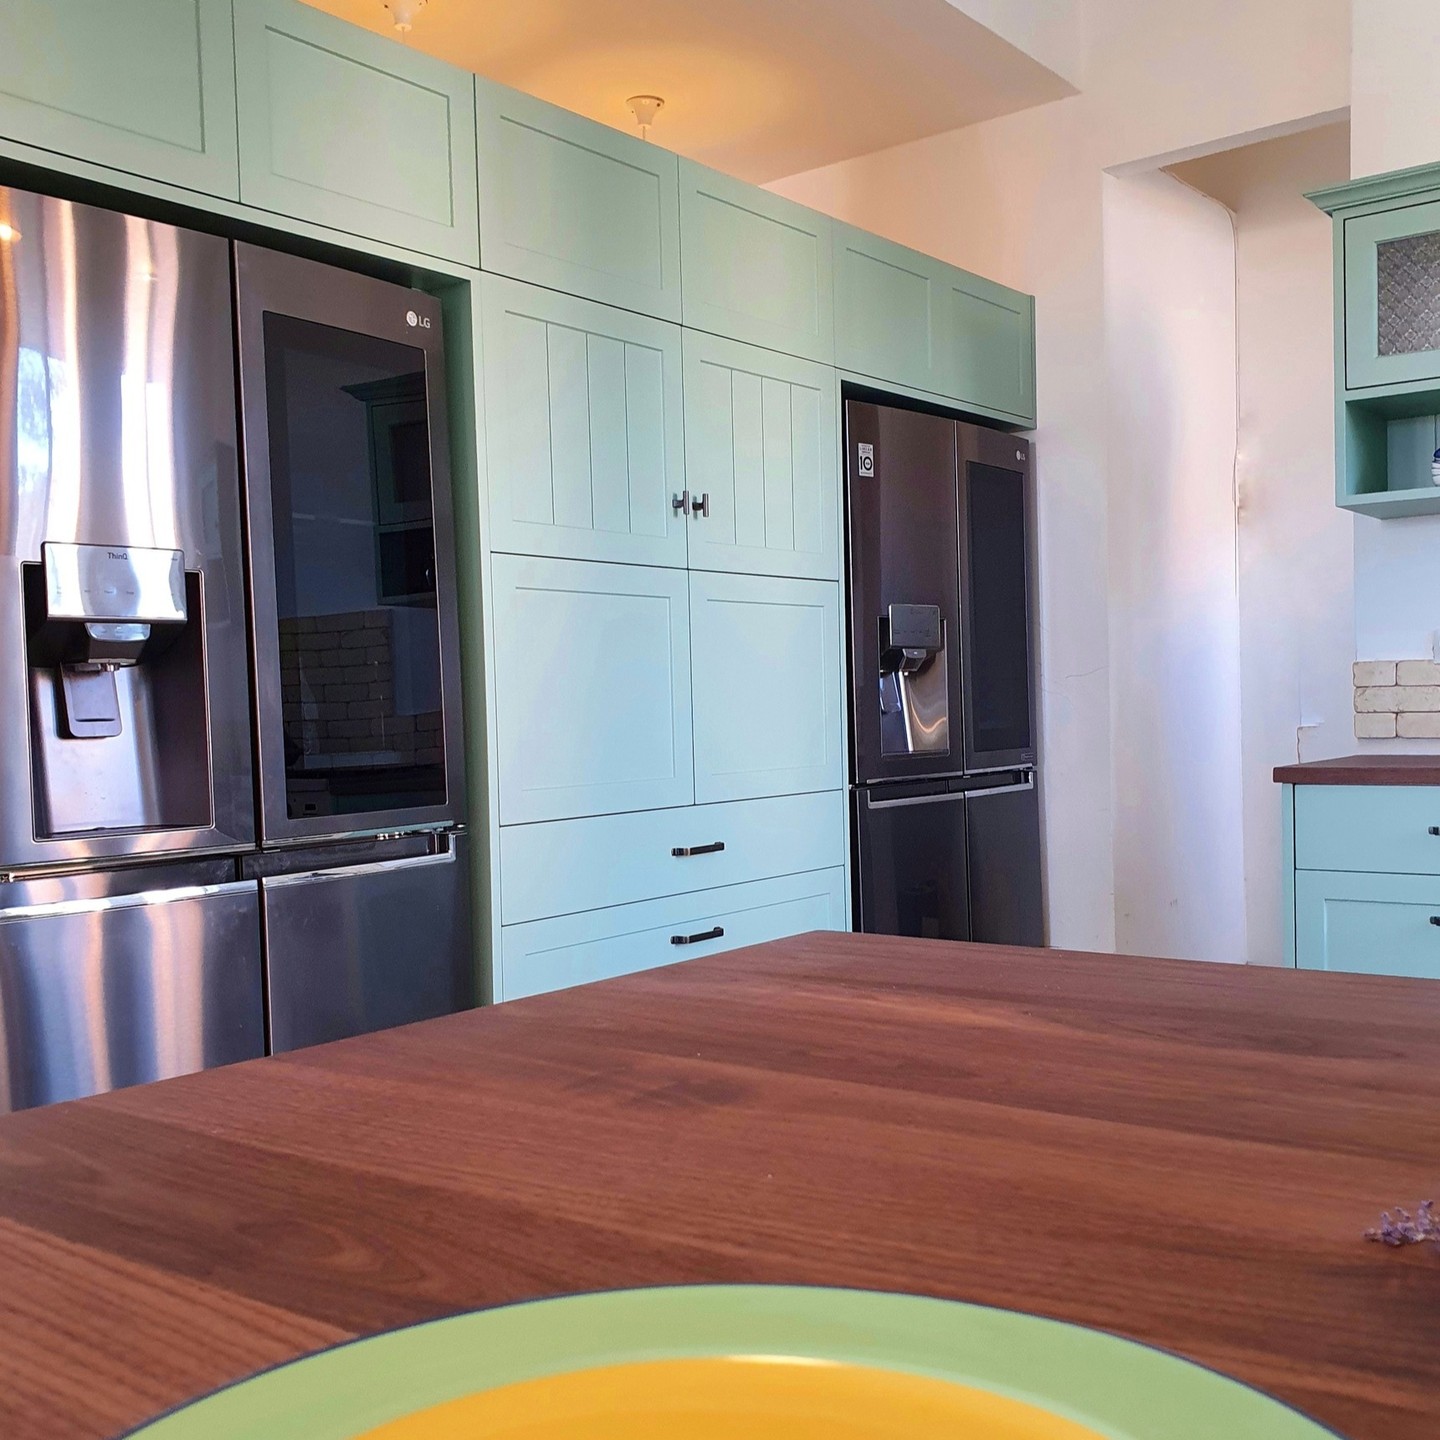 A kitchen with turquoise kitchen cabinets.